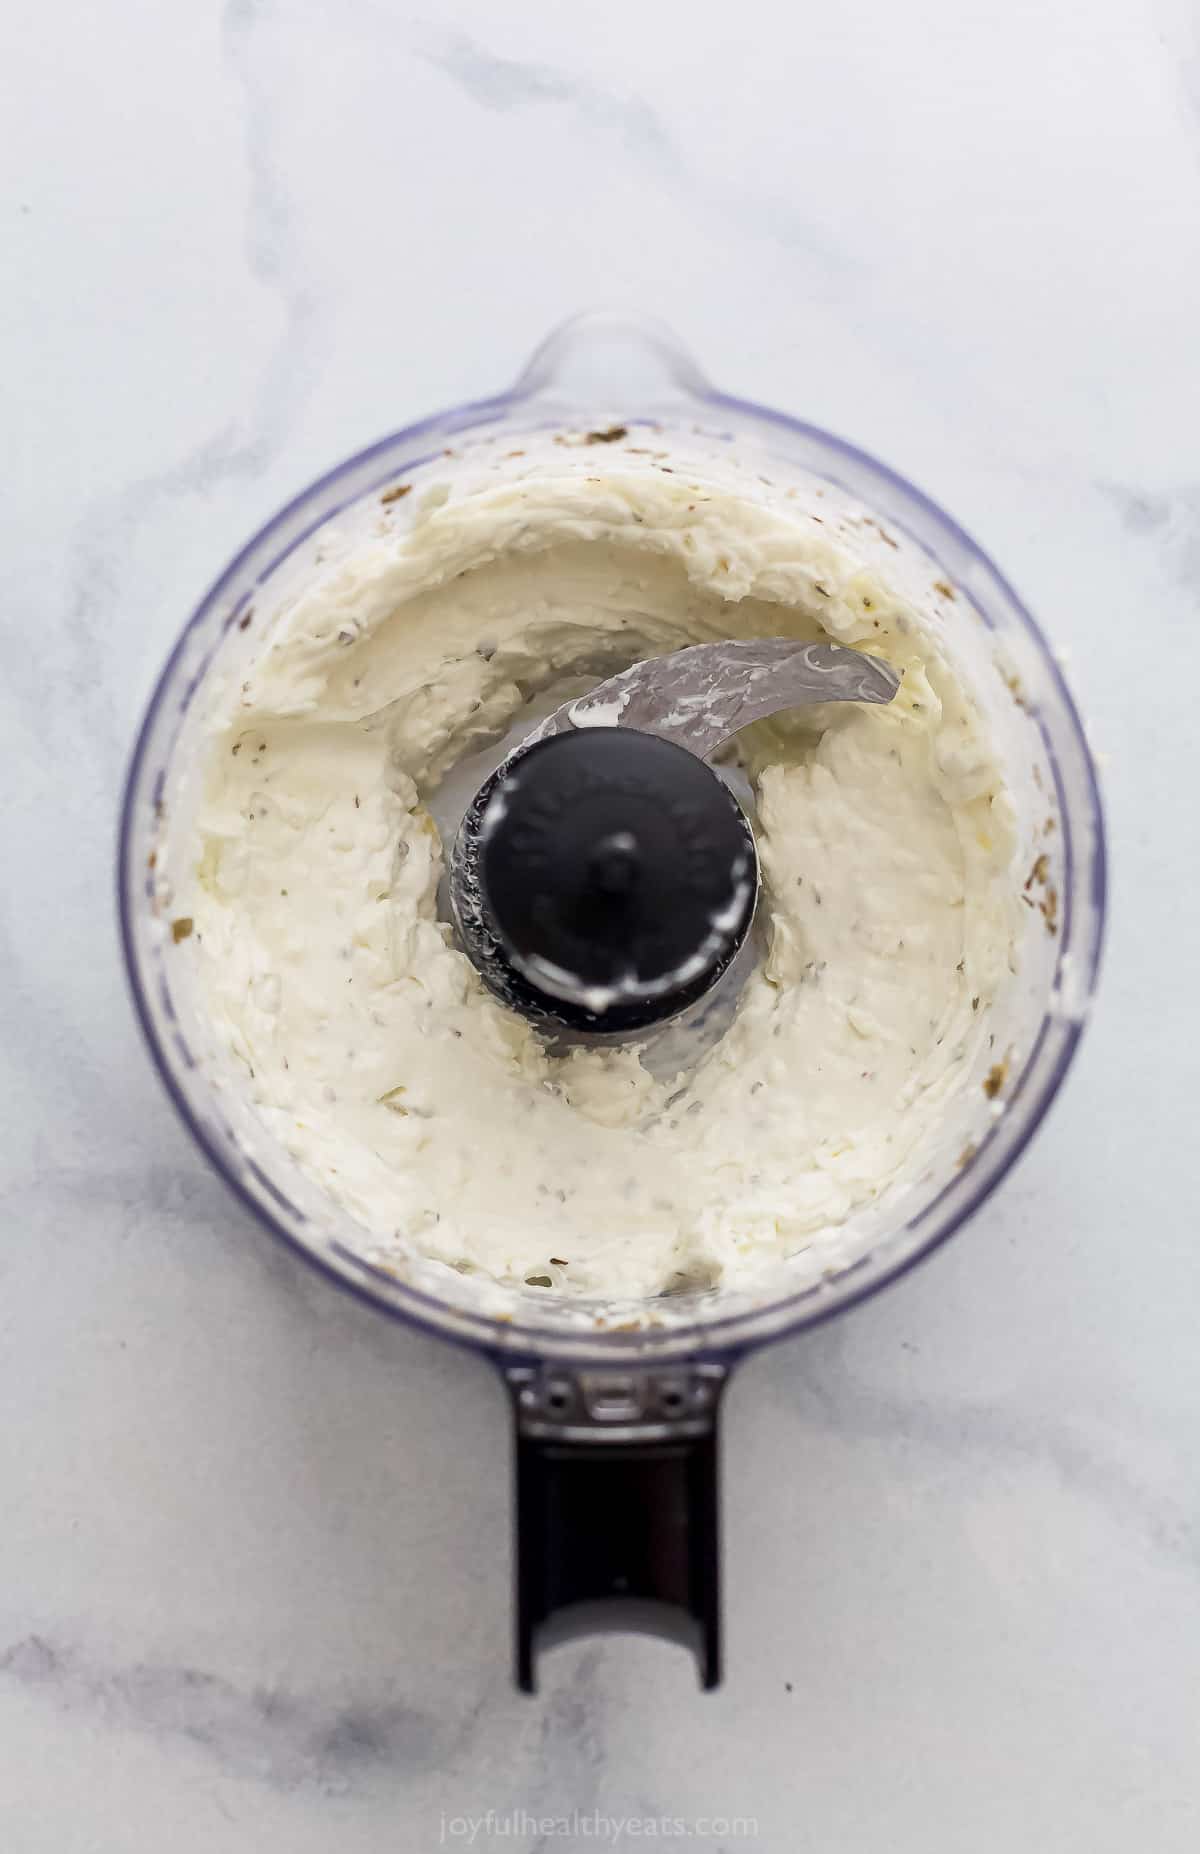 Whipped feta inside of a small food processor on a kitchen countertop